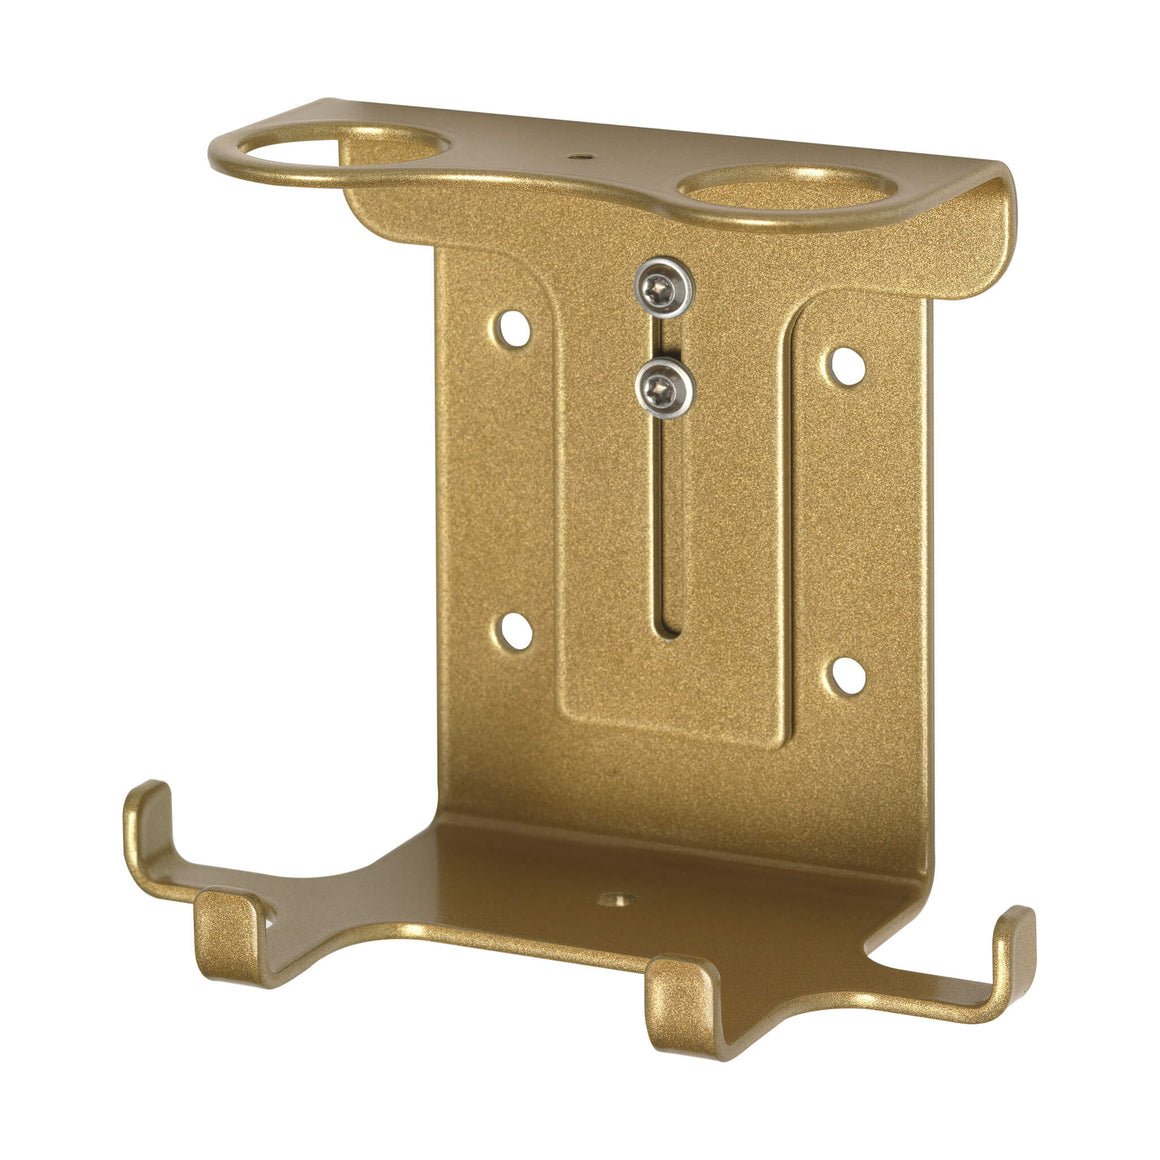 Double 500ml Security Wall-Mounted Holder - Gold